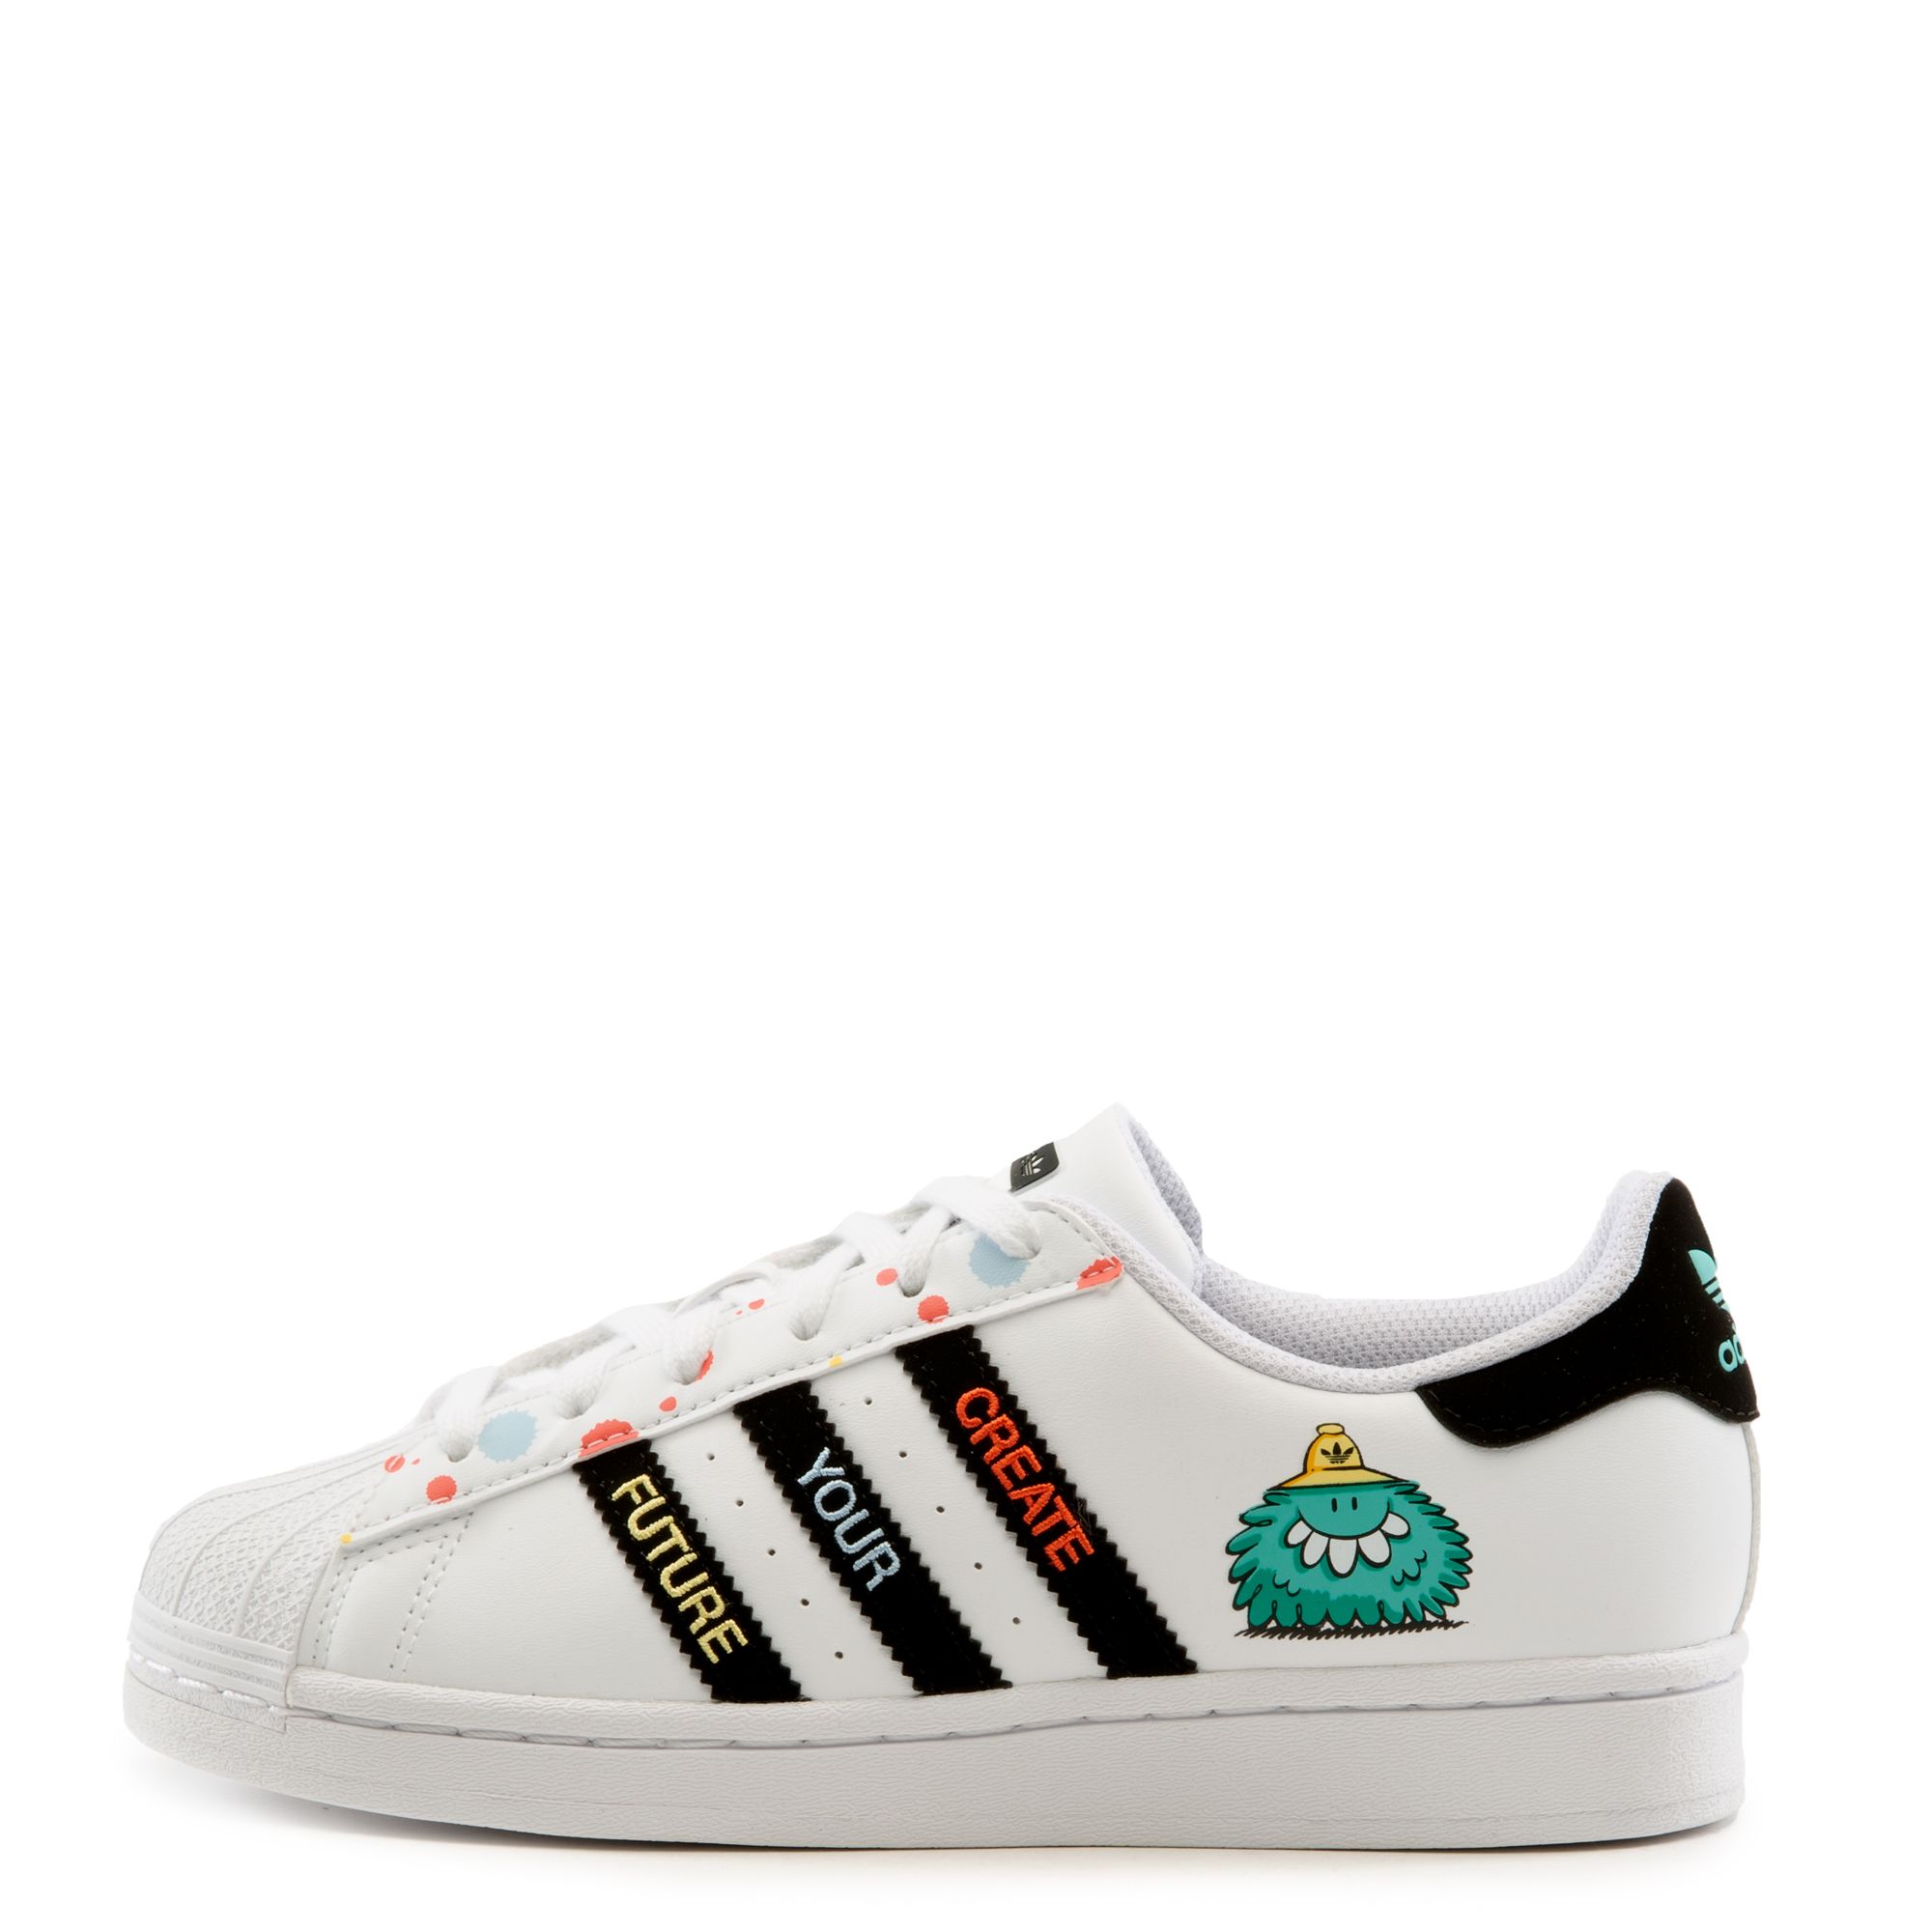 adidas Originals Superstar XLG trainers in future white/green